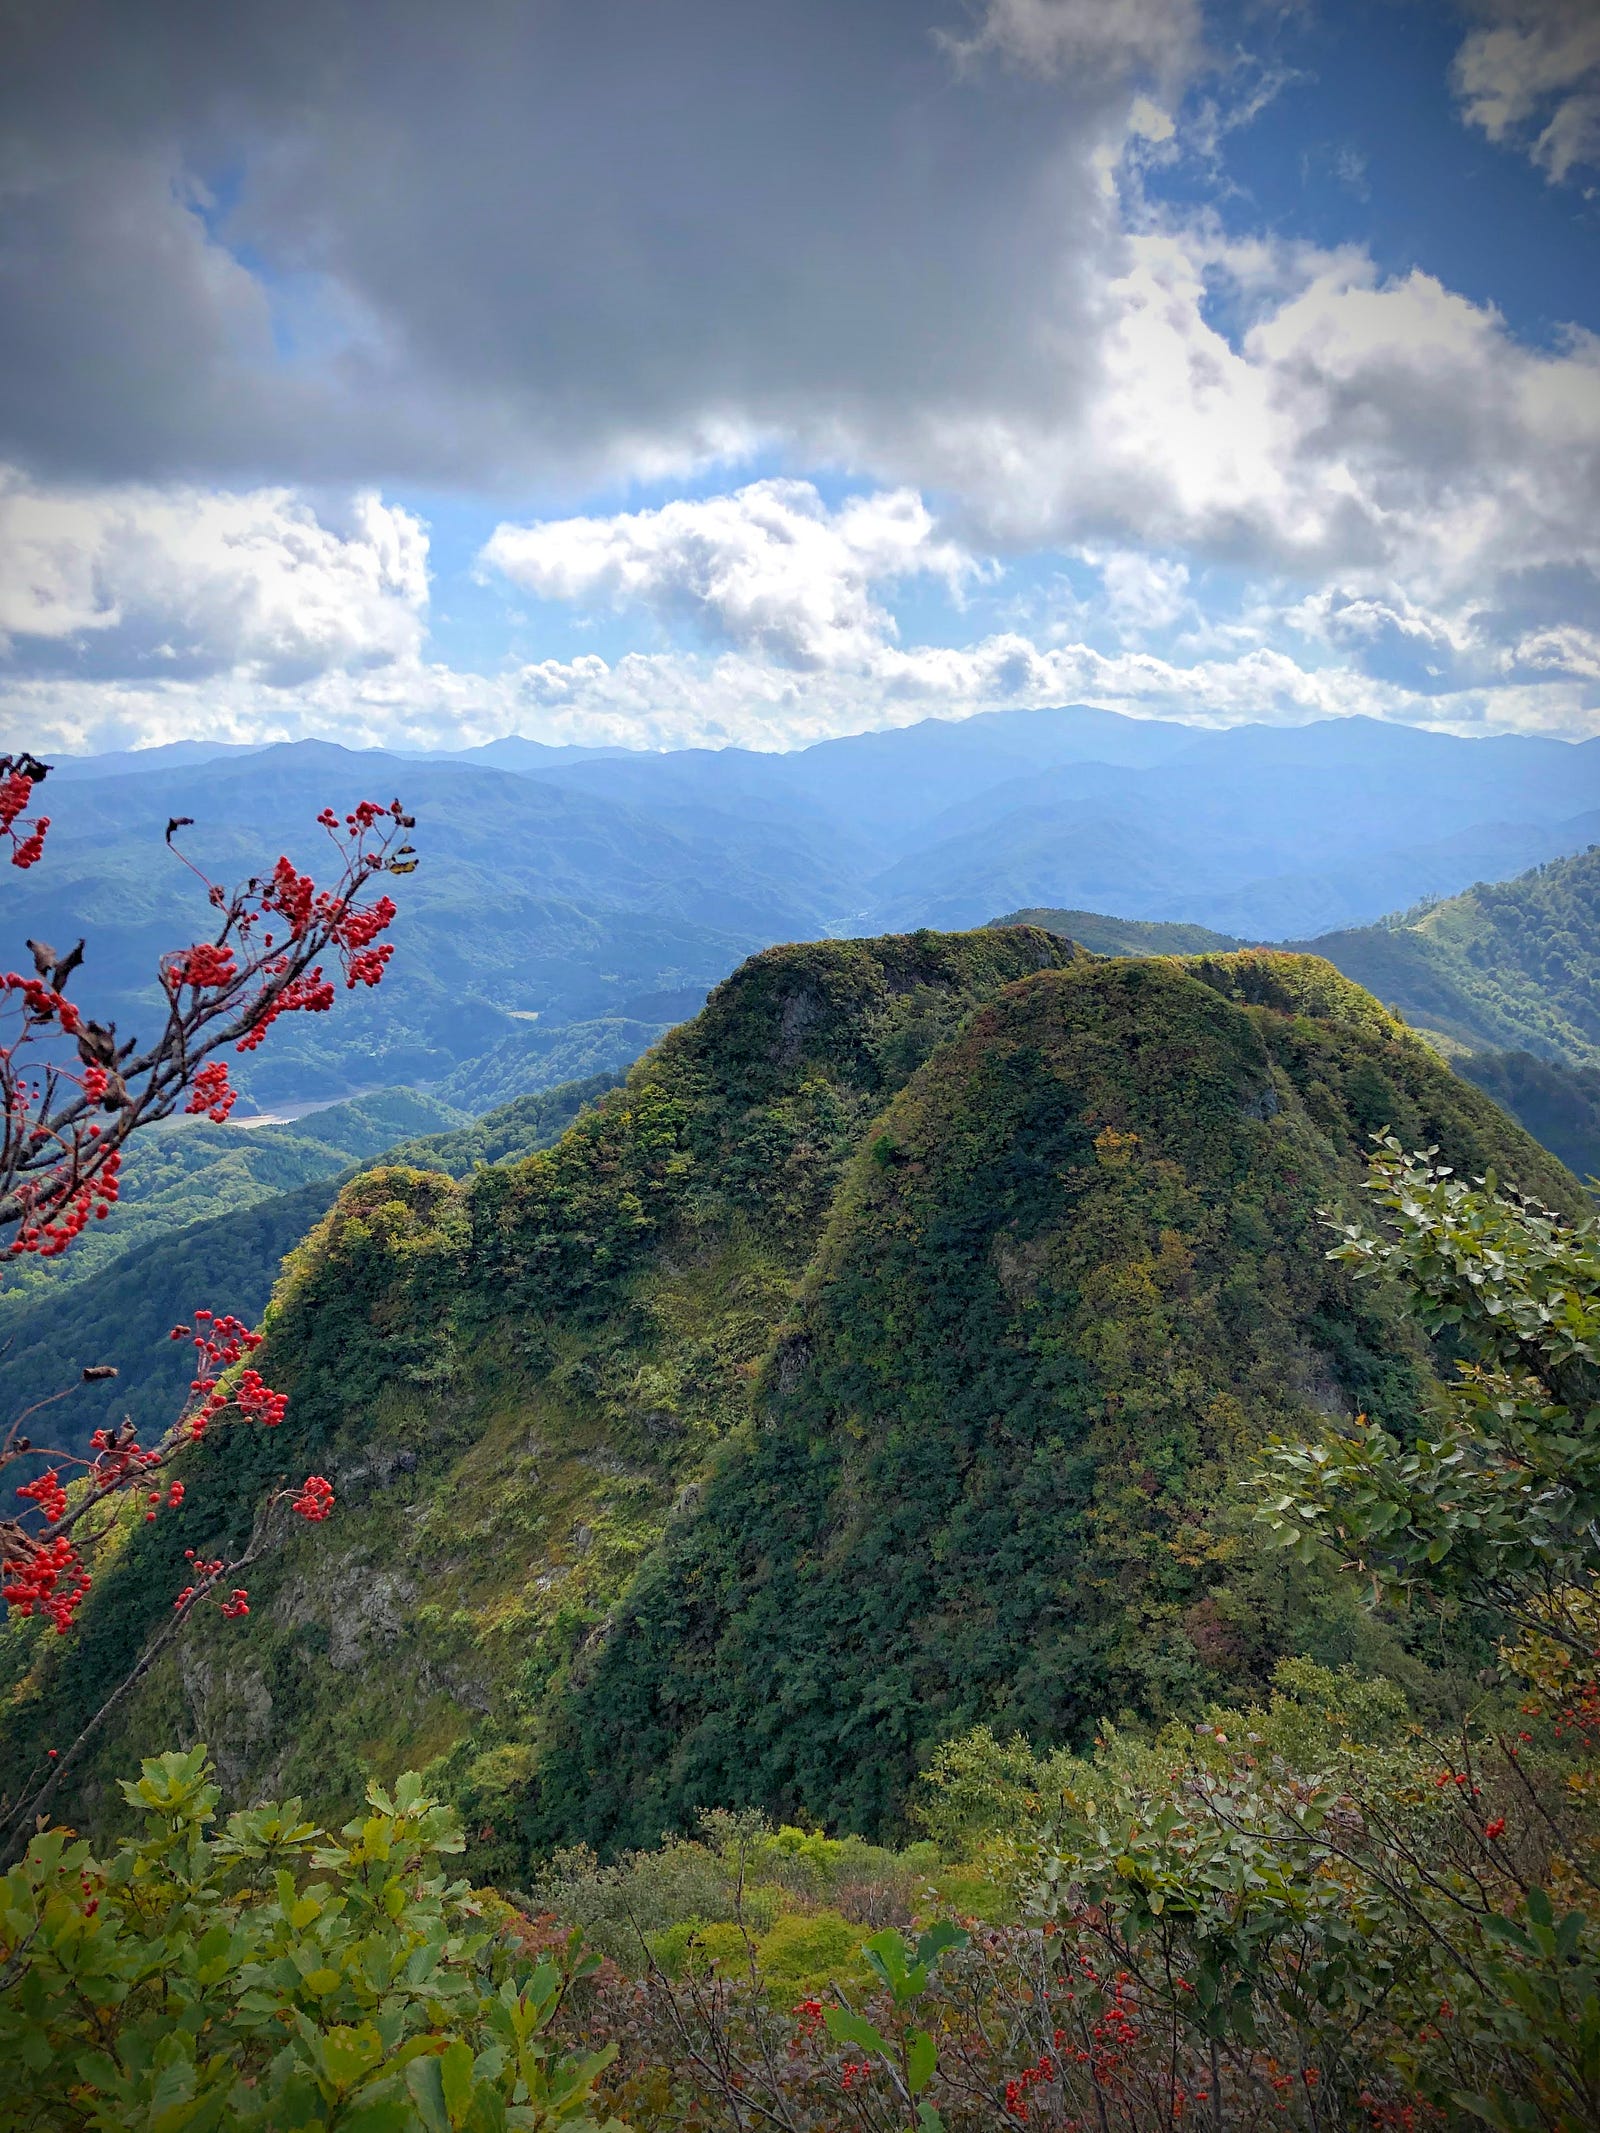 The leaves of Mt. Maya are only starting to change in early autumn on two mountains in the foreground